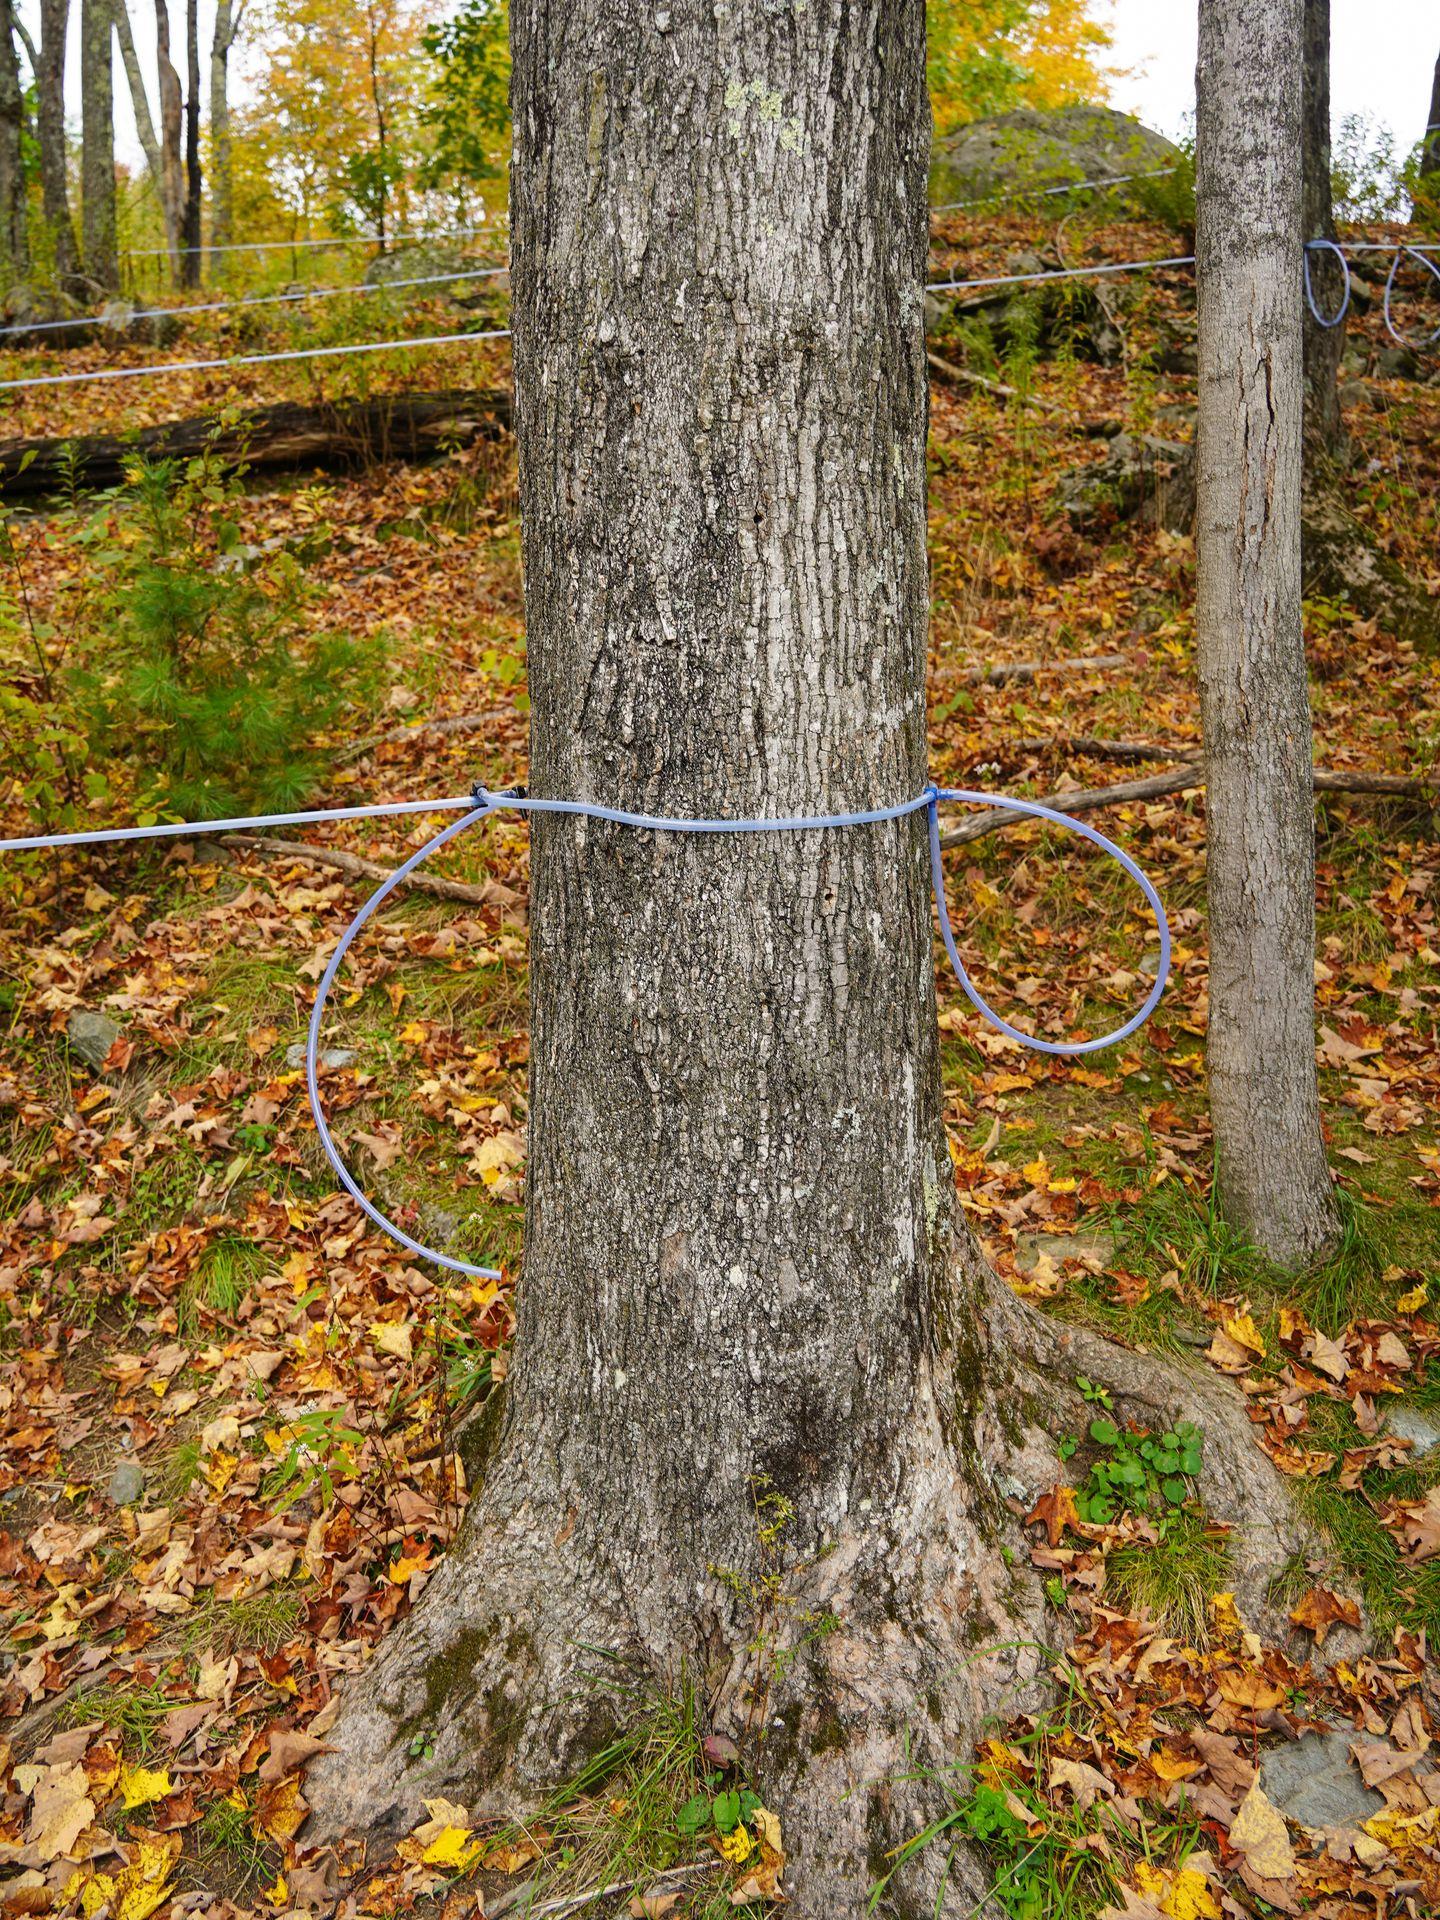 A tree with attached tubes to collect maple syrup.